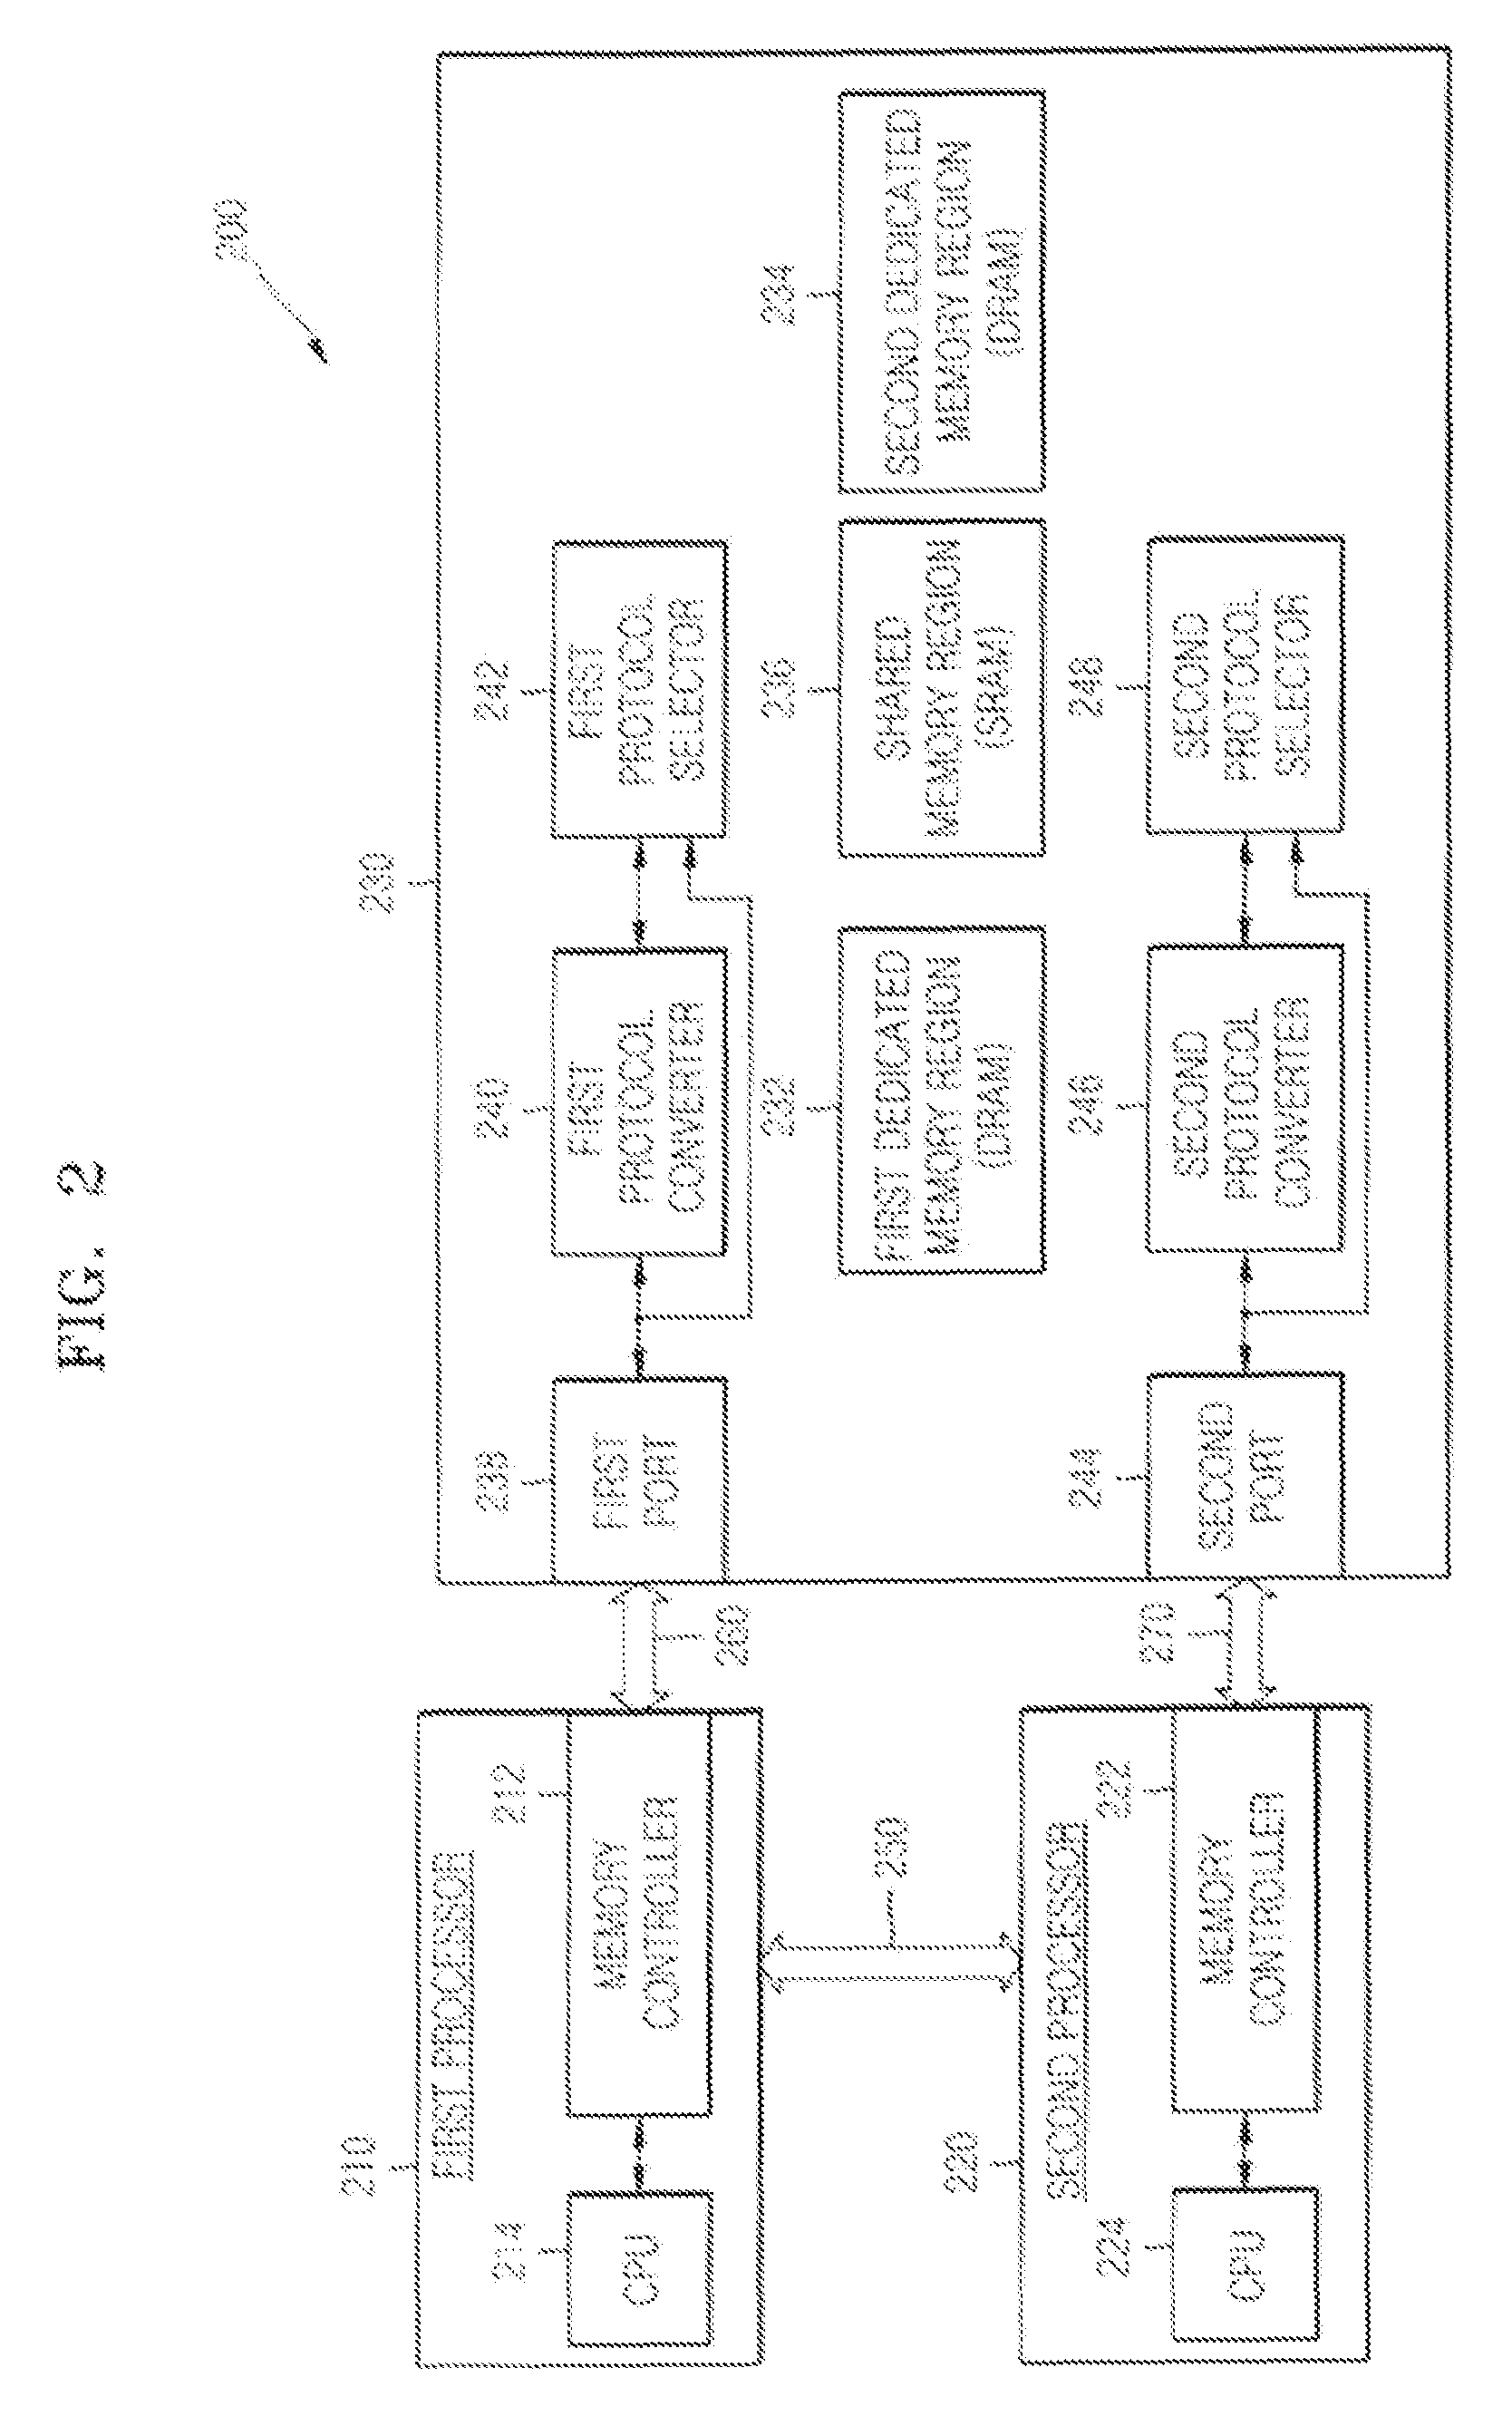 Multiport Memory Device, Multiprocessor System Including the Same, and Method of Transmitting Data In Multiprocessor System